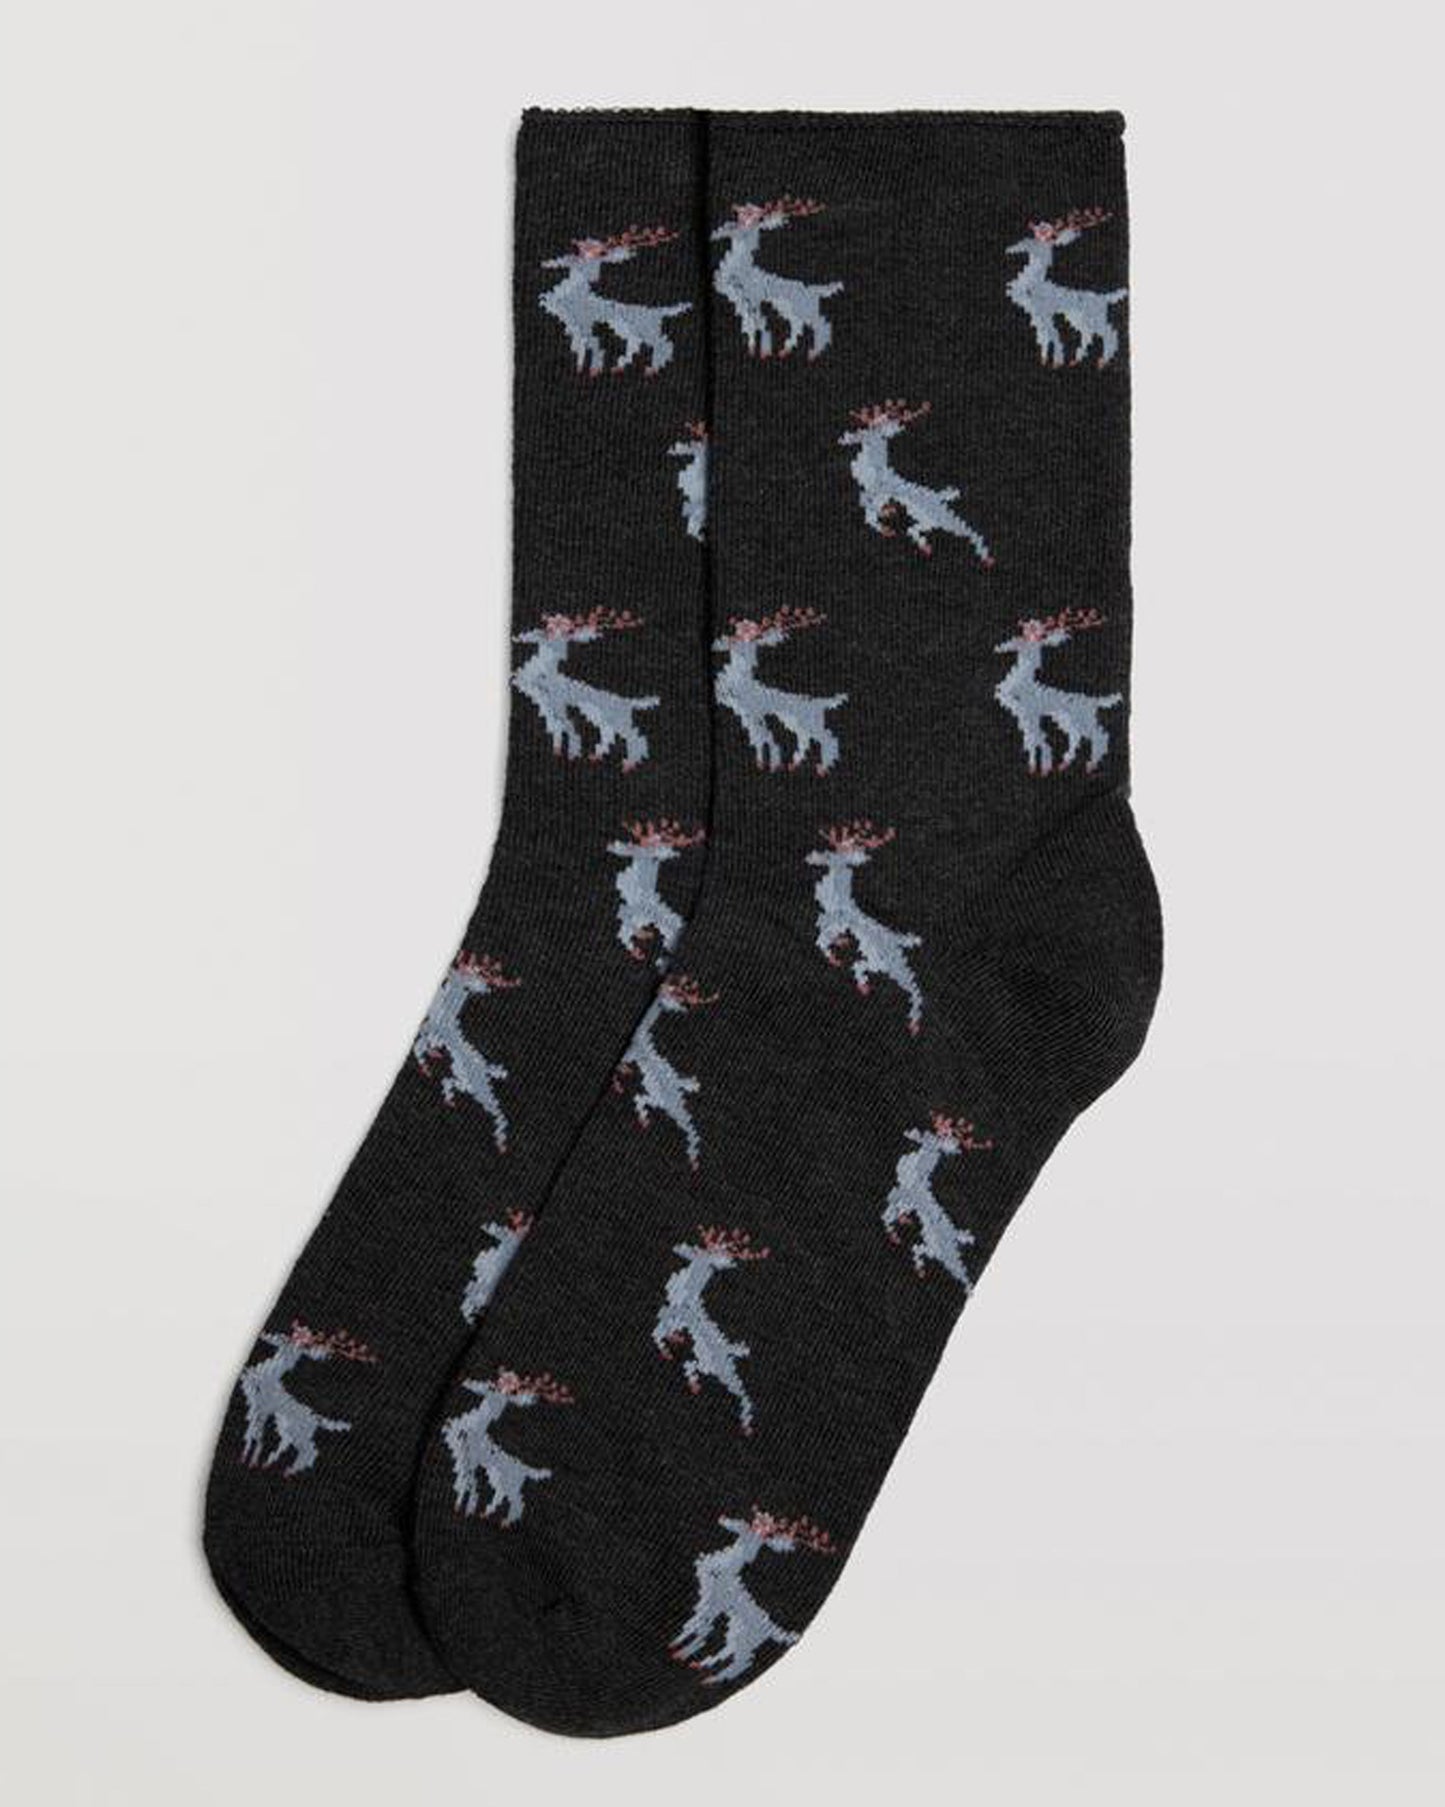 Ysabel Mora 12880 Reindeer Socks - Dark grey cotton socks with an all over reindeer pattern in pale blue and dark red, shaped heel, flat toe seam and no cuff edge roll.